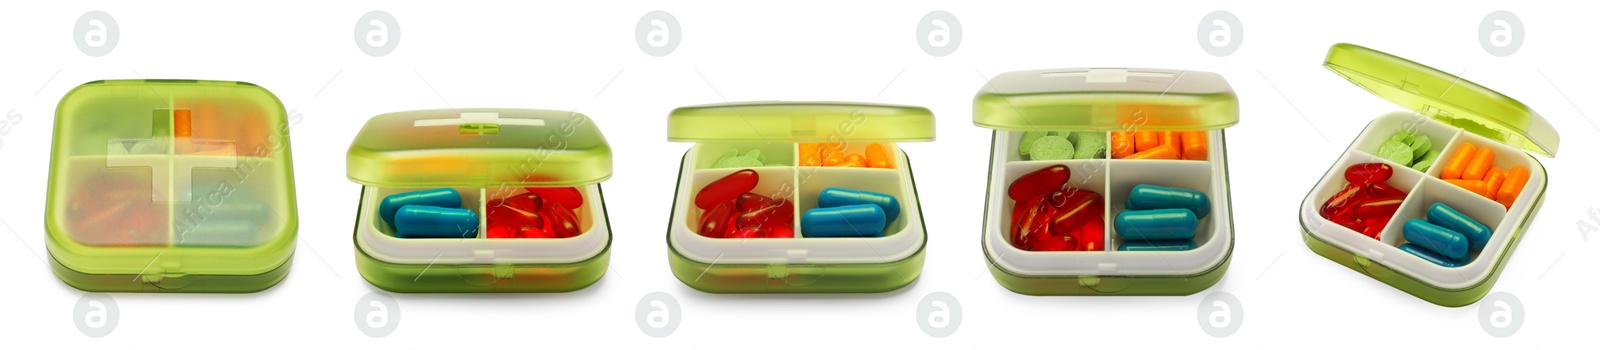 Image of Pill organizer isolated on white, views from different angles